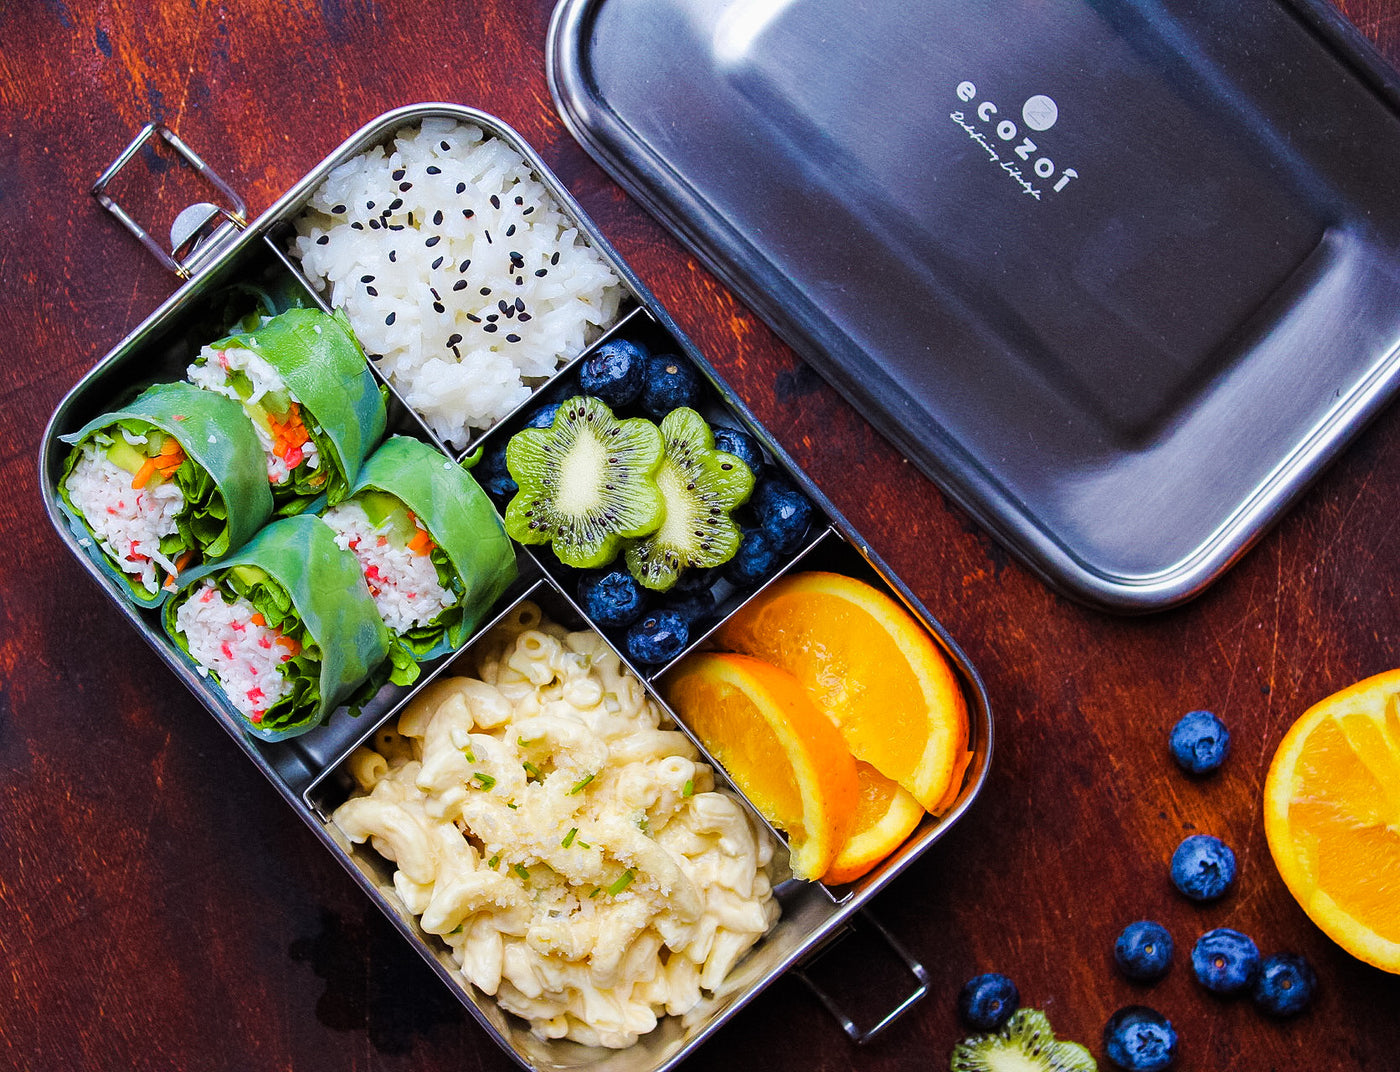 Leak-proof Lunch Box Containers, 5-compartment Bento-style Lunch